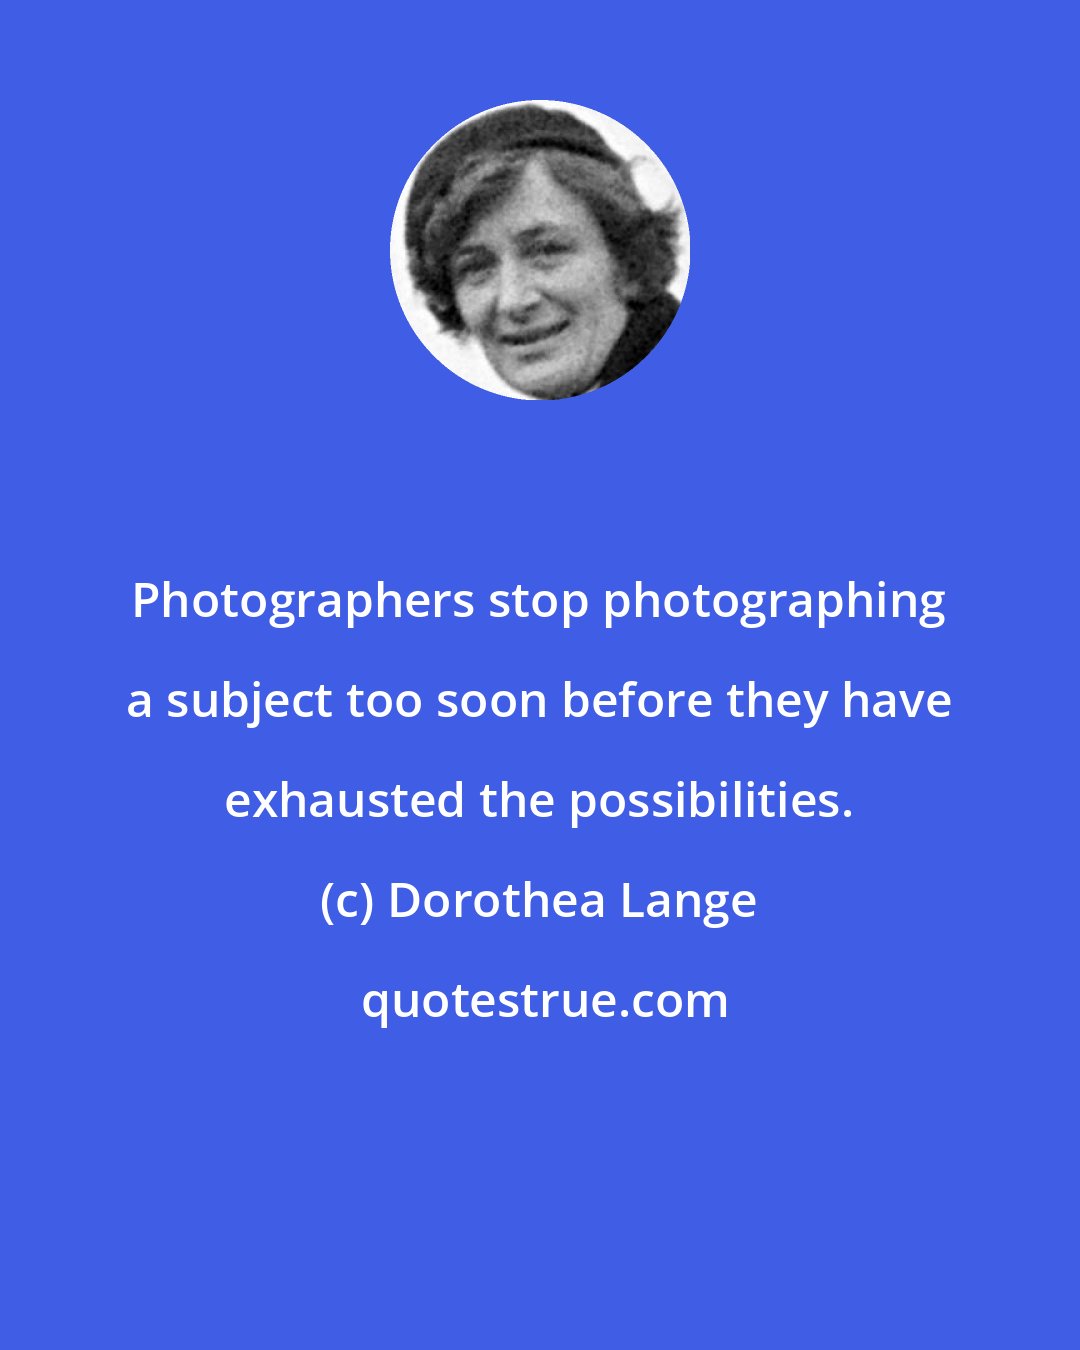 Dorothea Lange: Photographers stop photographing a subject too soon before they have exhausted the possibilities.